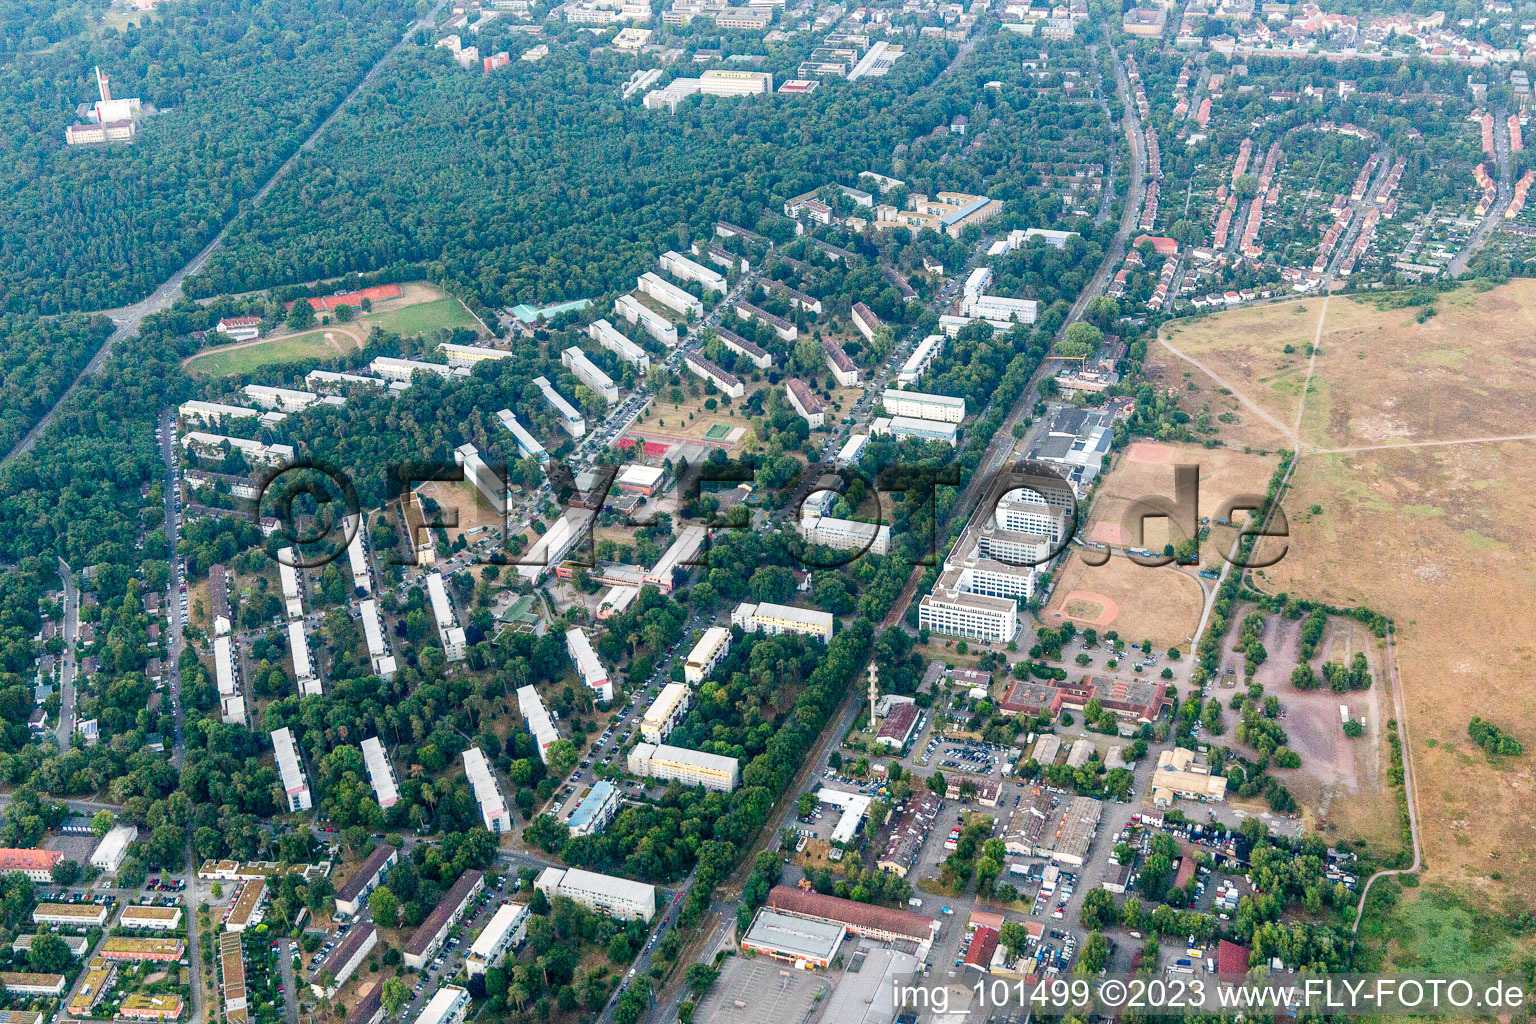 District Neureut in Karlsruhe in the state Baden-Wuerttemberg, Germany seen from above